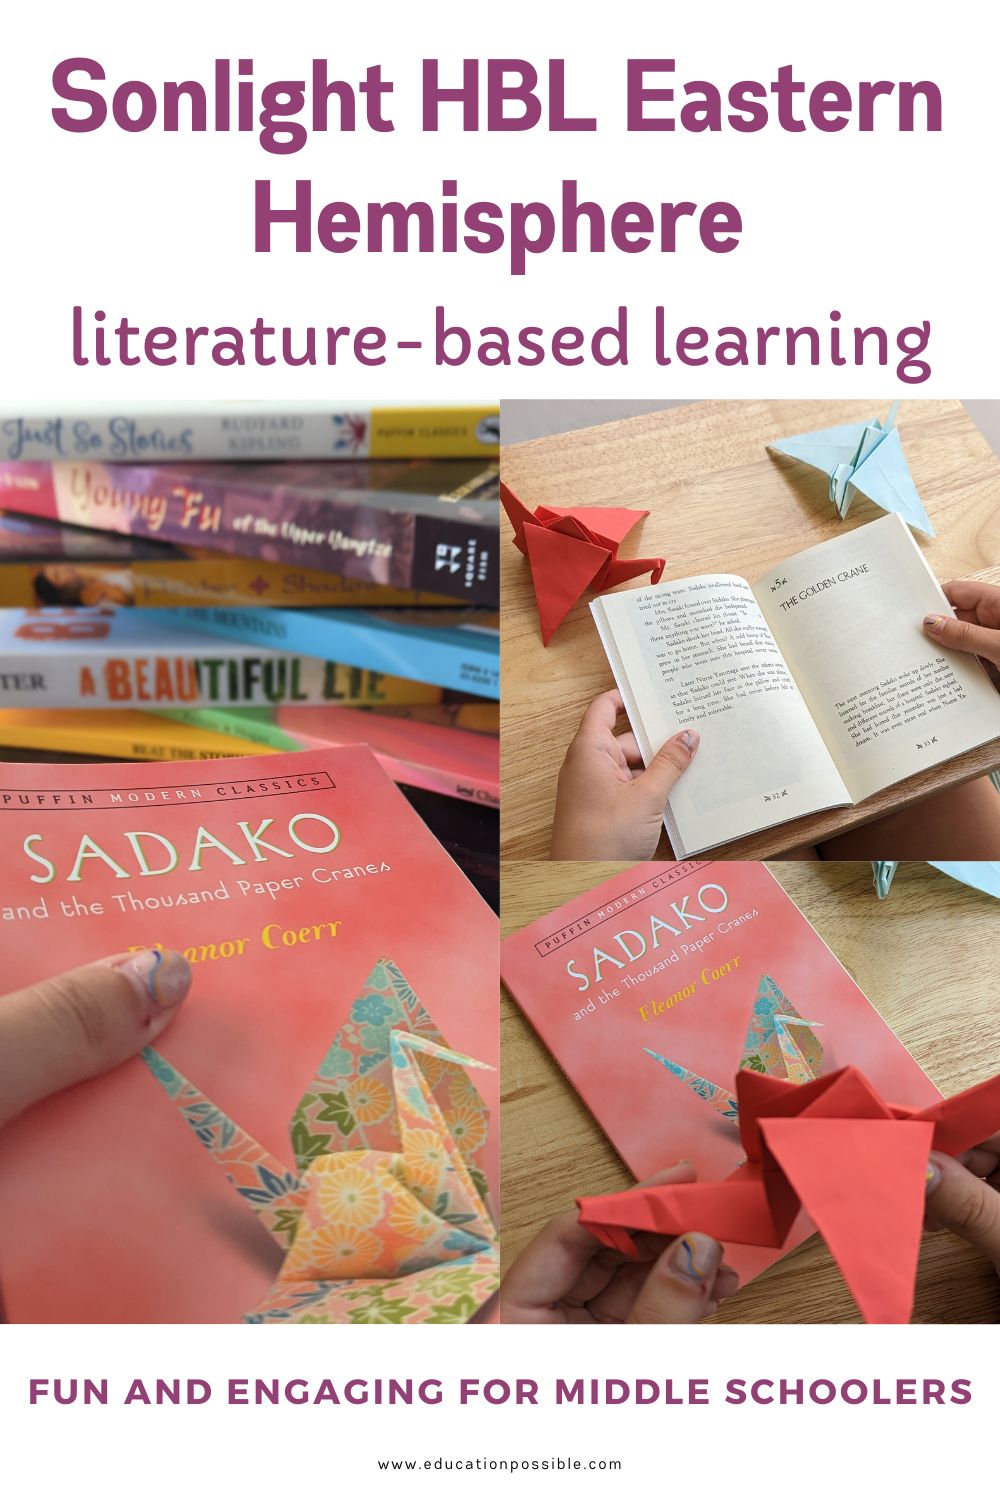 Collage of 3 images. Girl holding Sadako book with other books stacked in background. Sadako book on table with girl holding red origami crane in hands. Girl reading book with red and blue origami cranes sitting on small table.